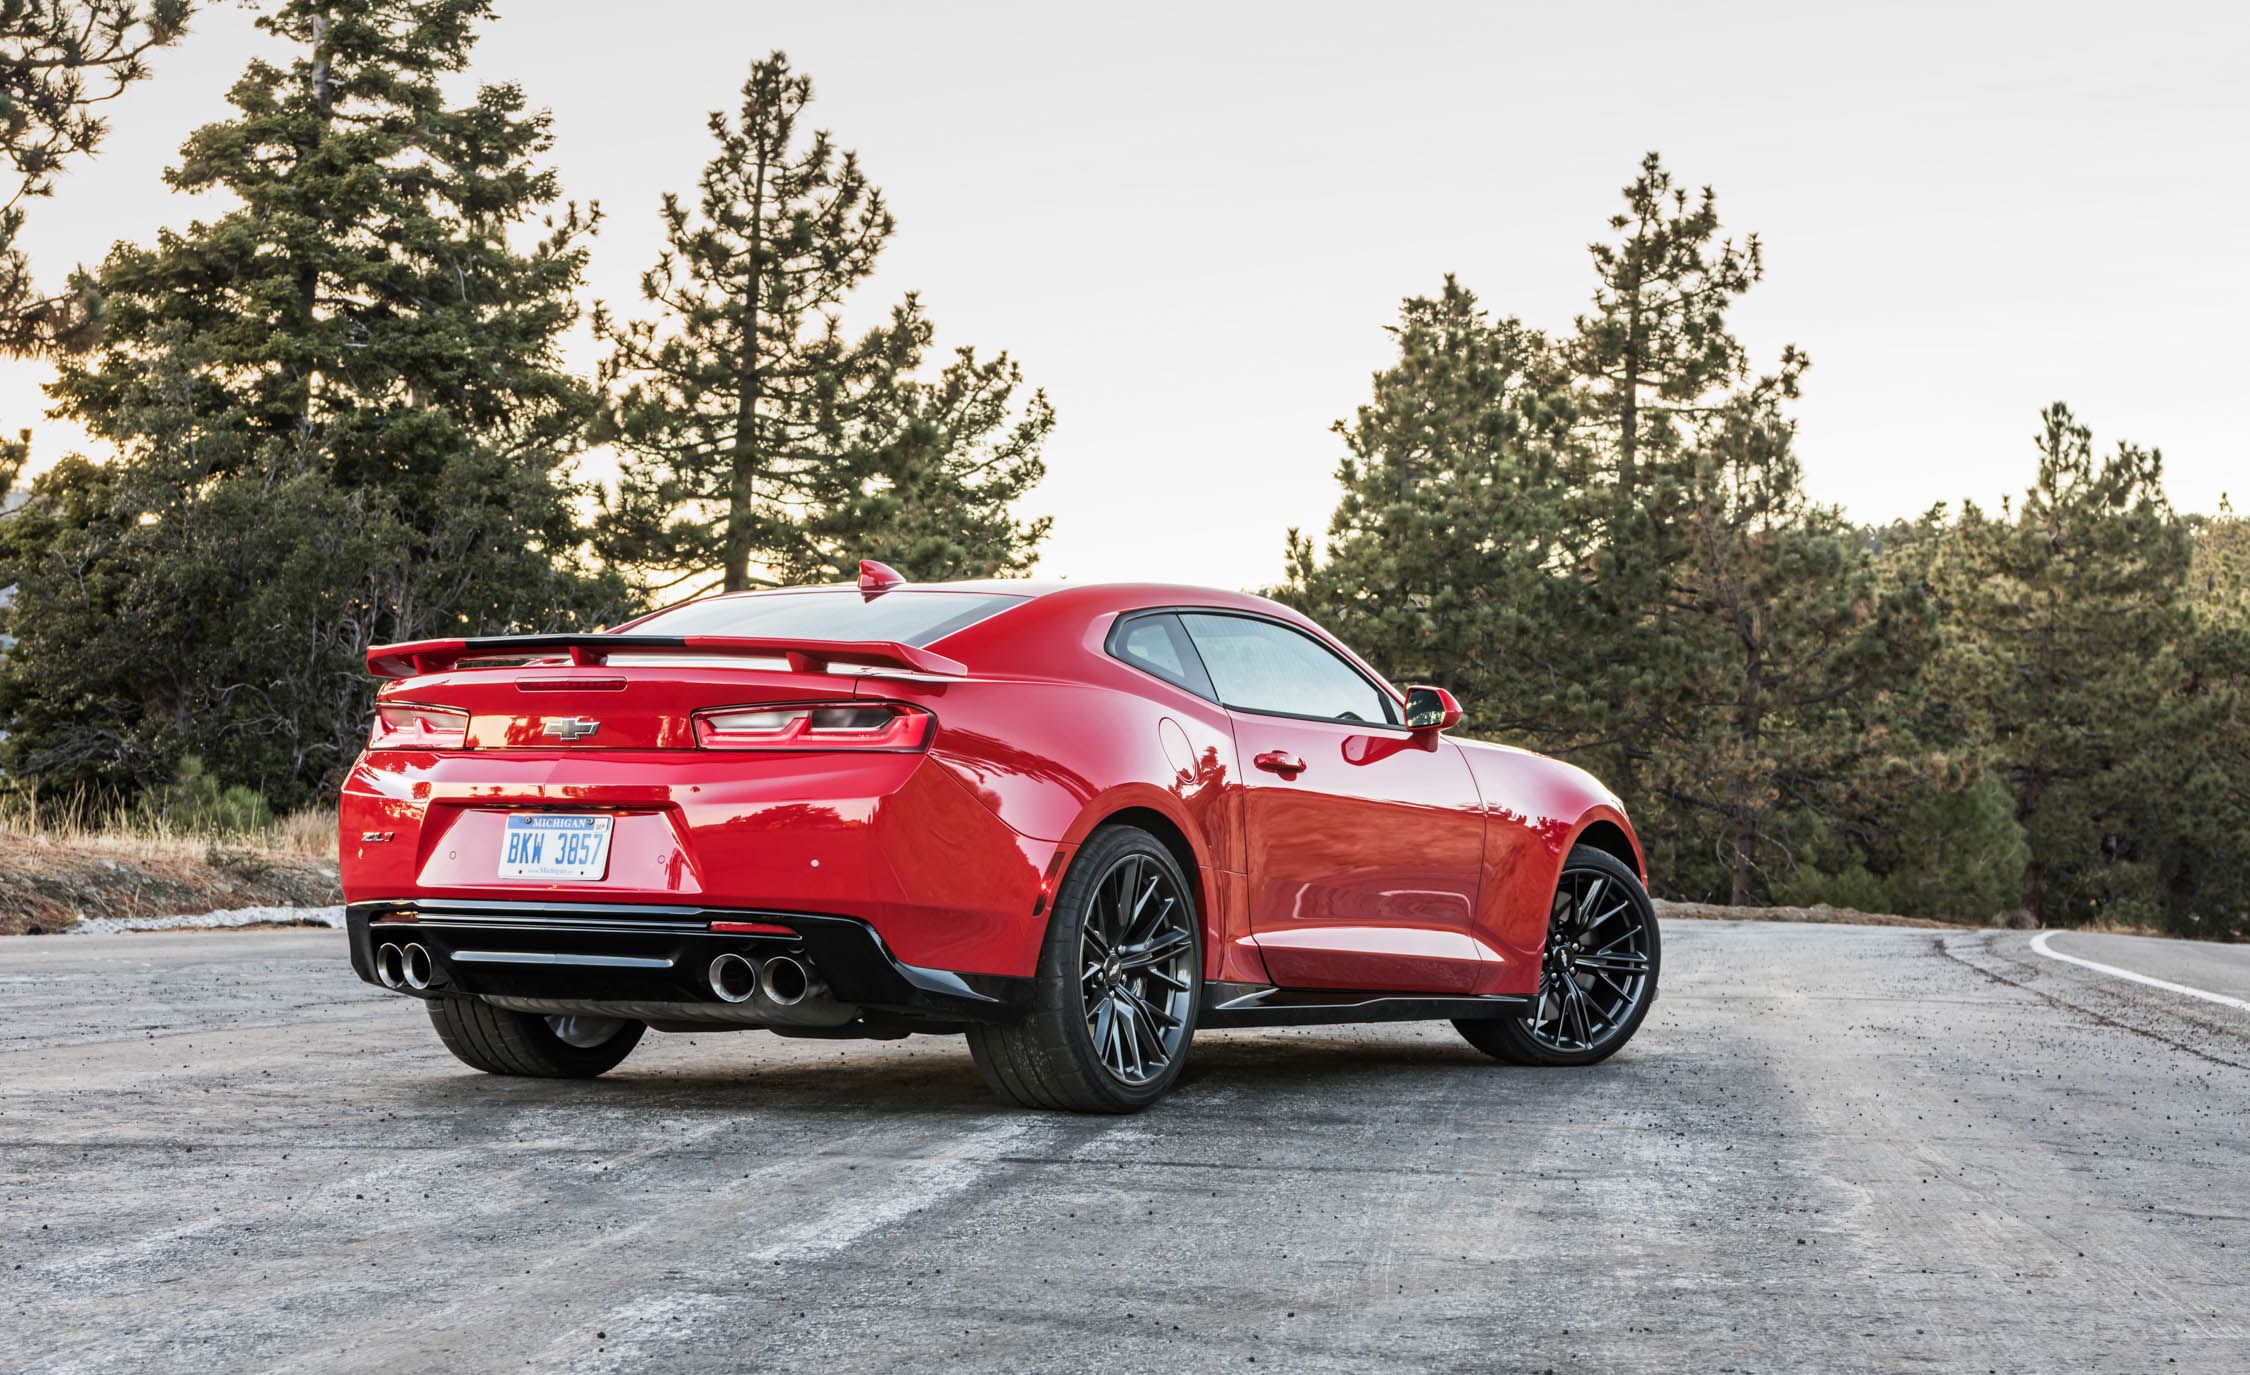 2017 Chevrolet Camaro ZL1 Red Exterior Rear And Side (View 61 of 62)